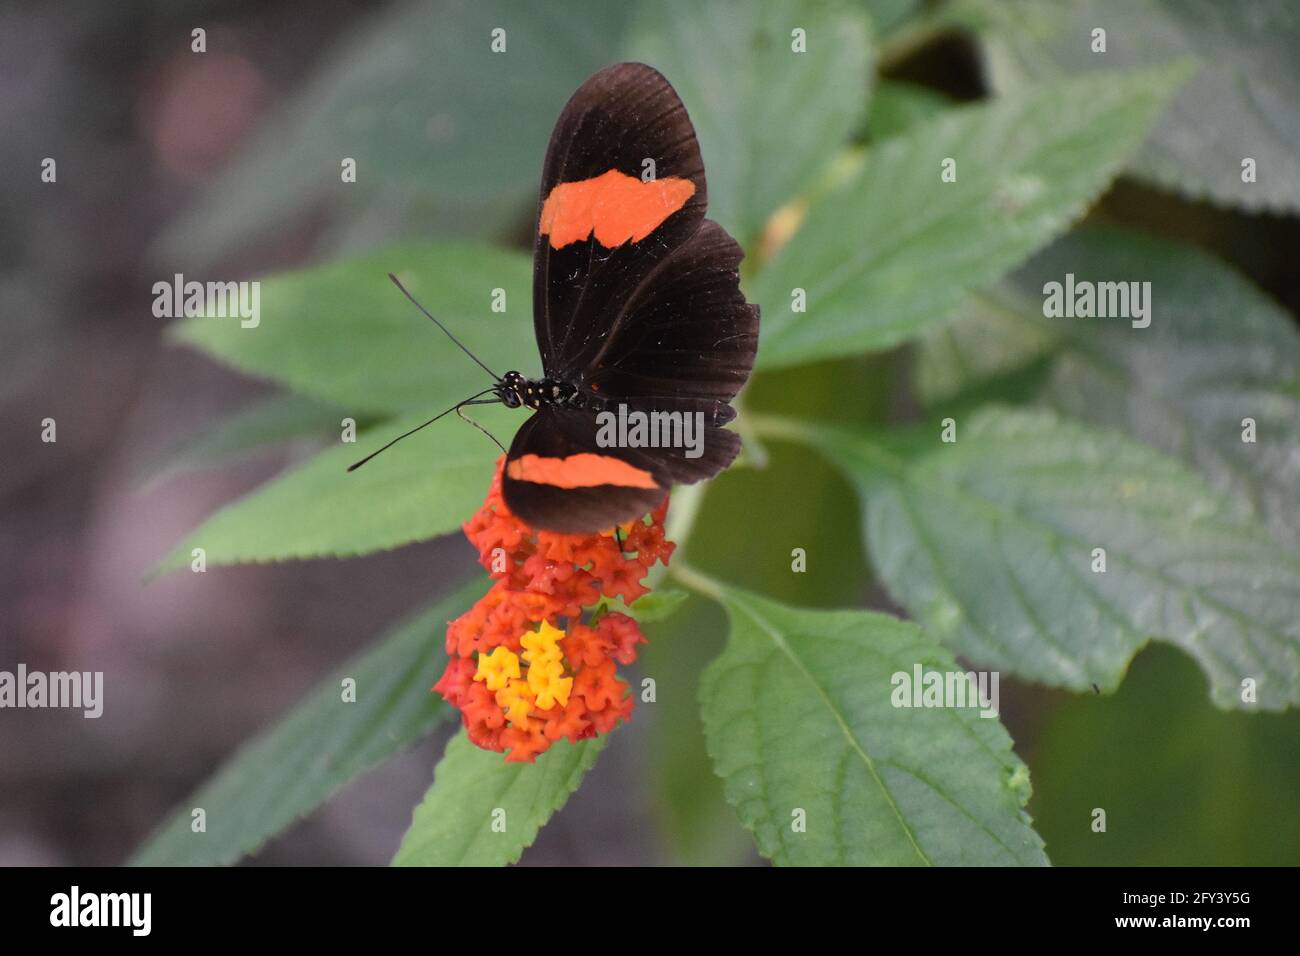 Heliconius melpomene, commonly known as the postman butterfly. Stock Photo